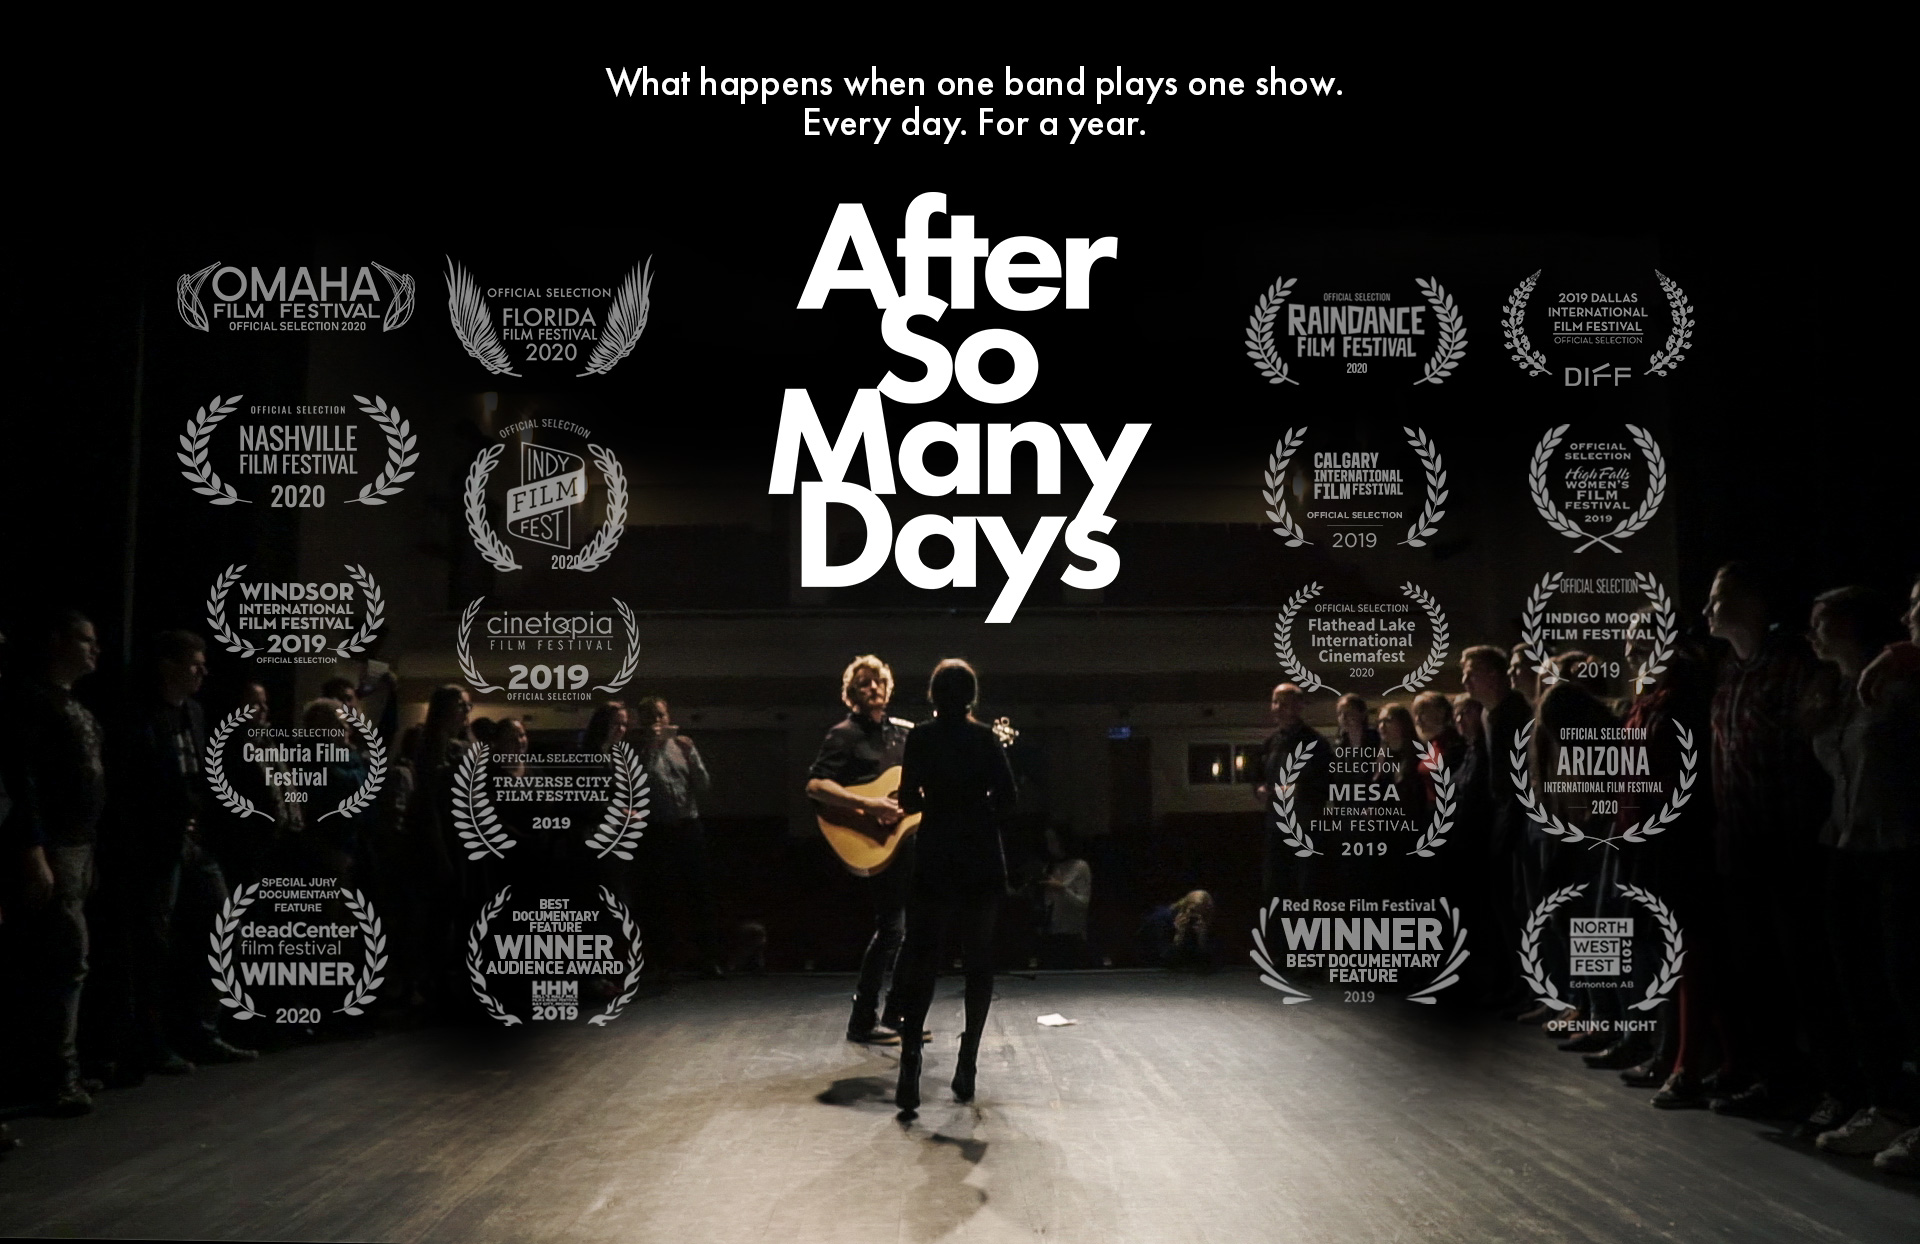 After So Many Days: A 365 Day Tour by Samantha Yonack and Jim Hanft [Exclusive Interview]